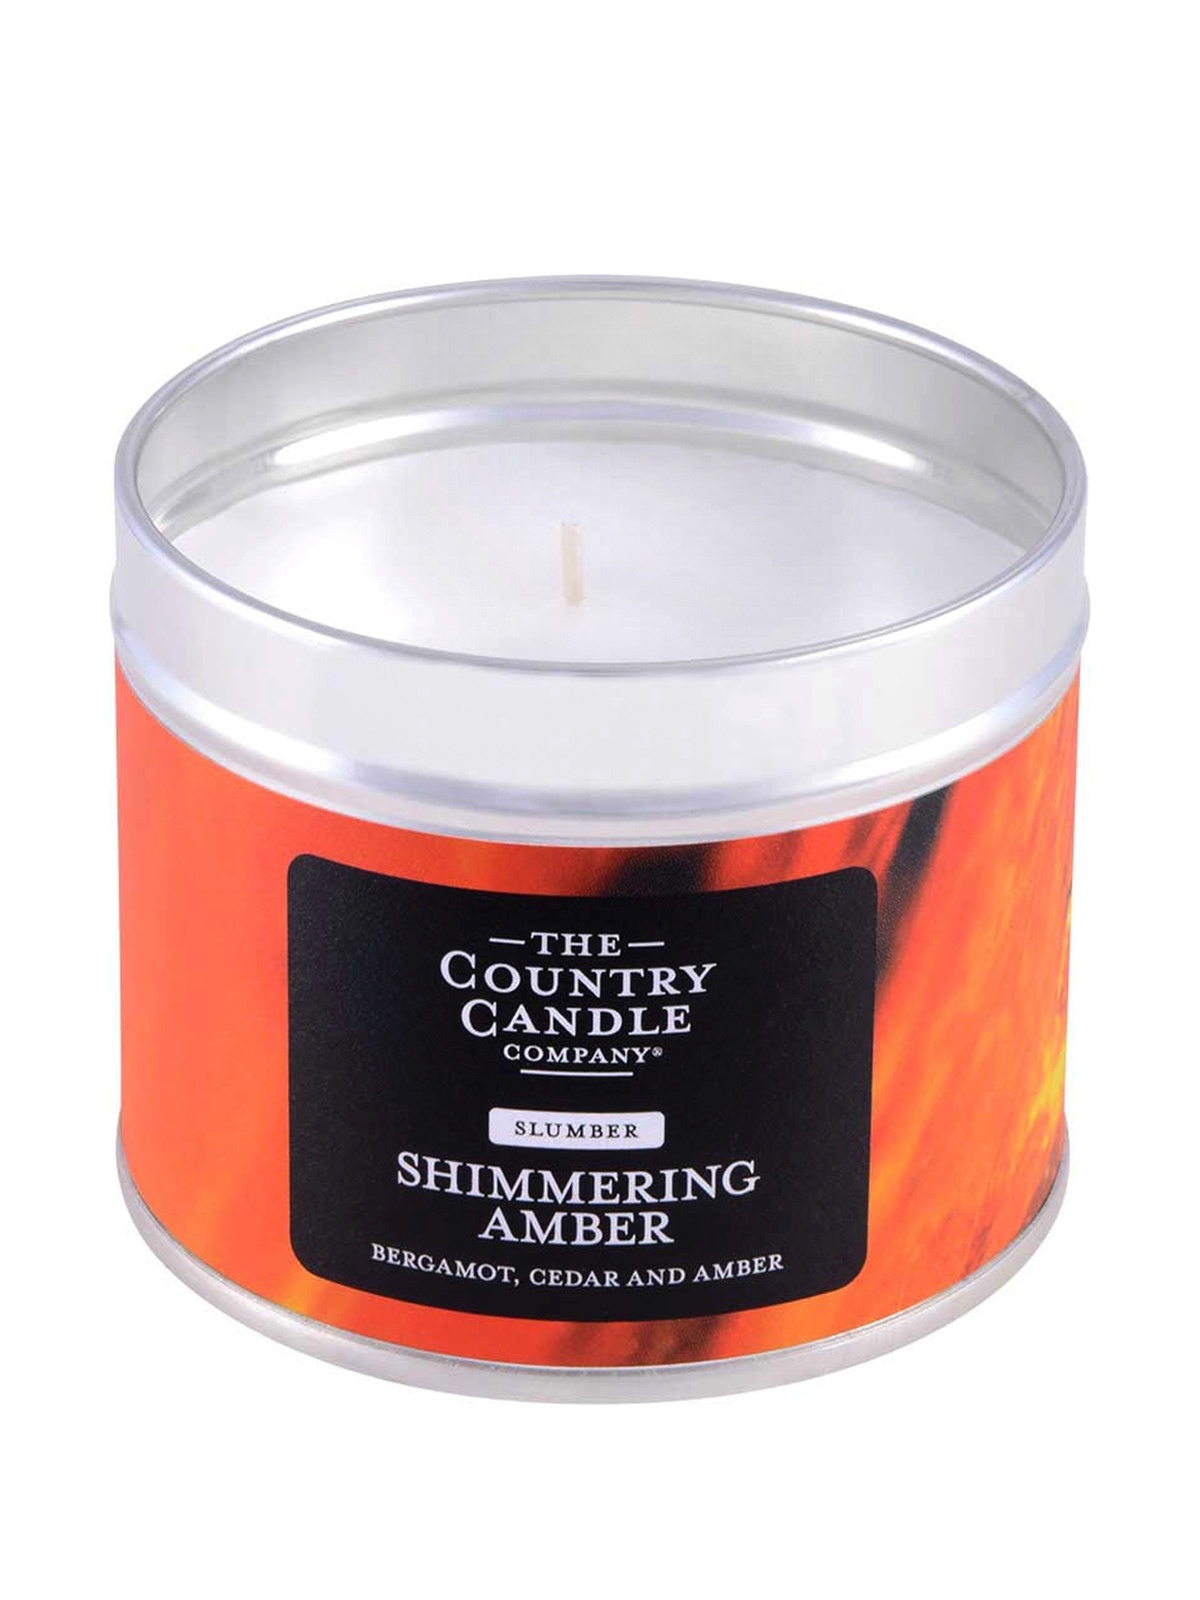 THE COUNTRY CANDLES